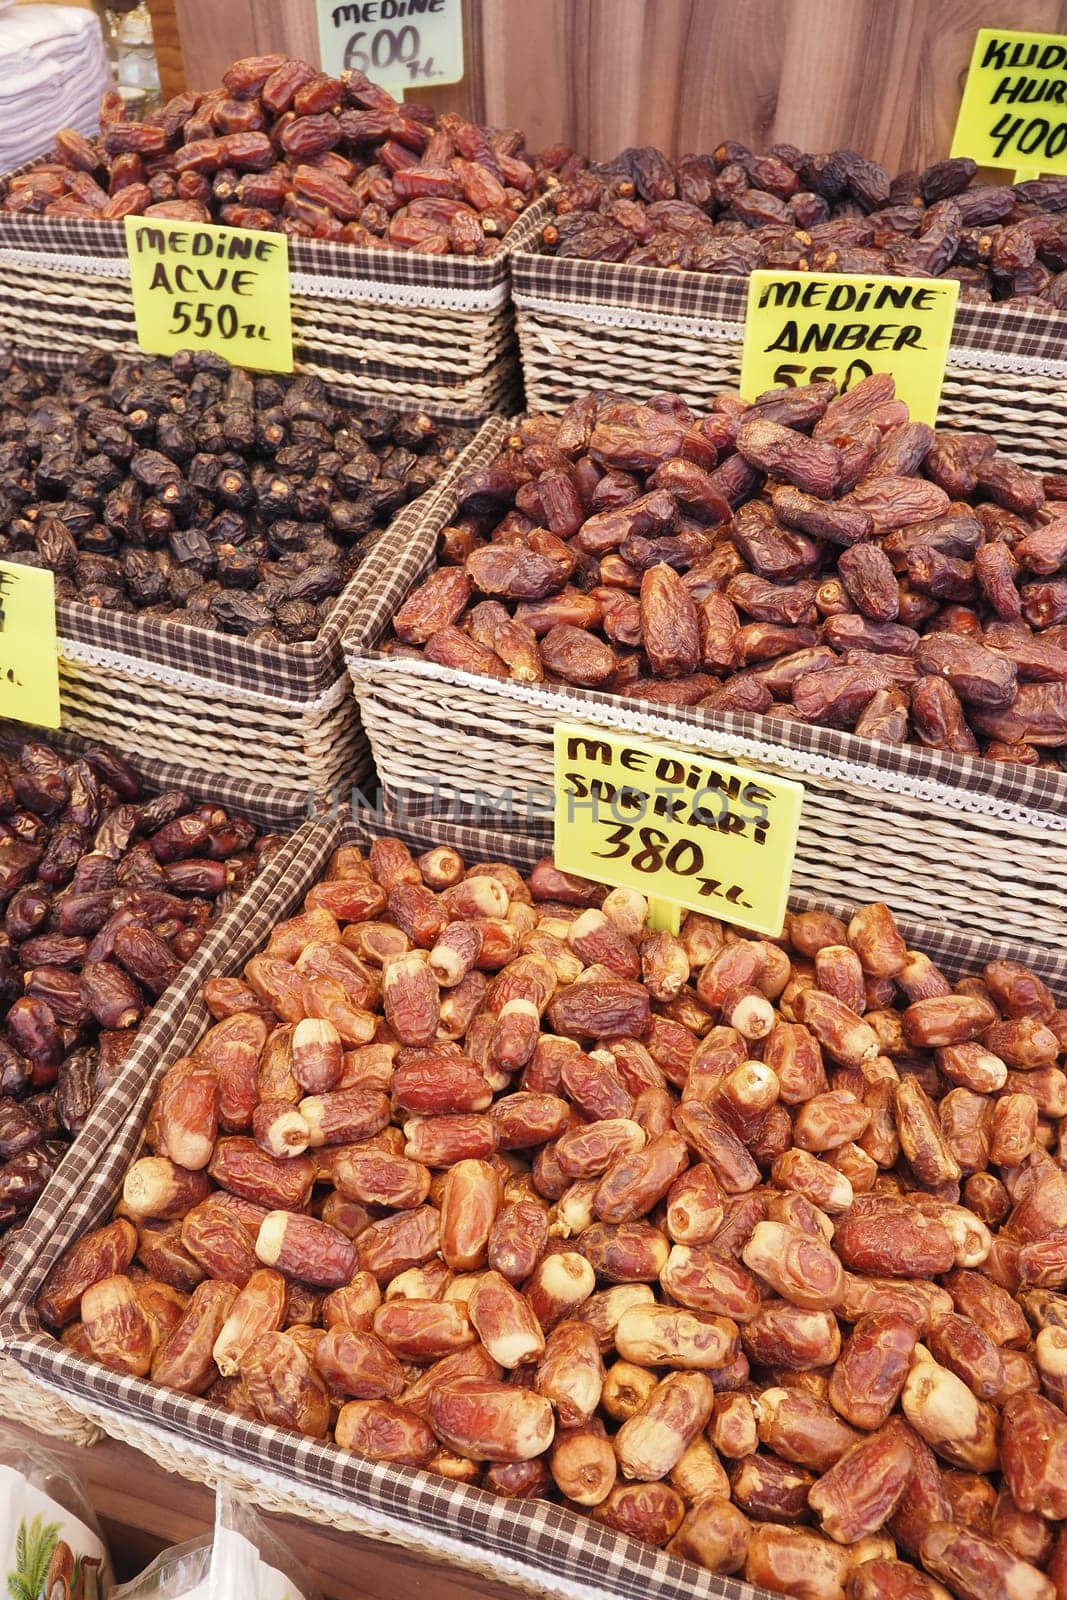 many date fruits display for sale at local market .